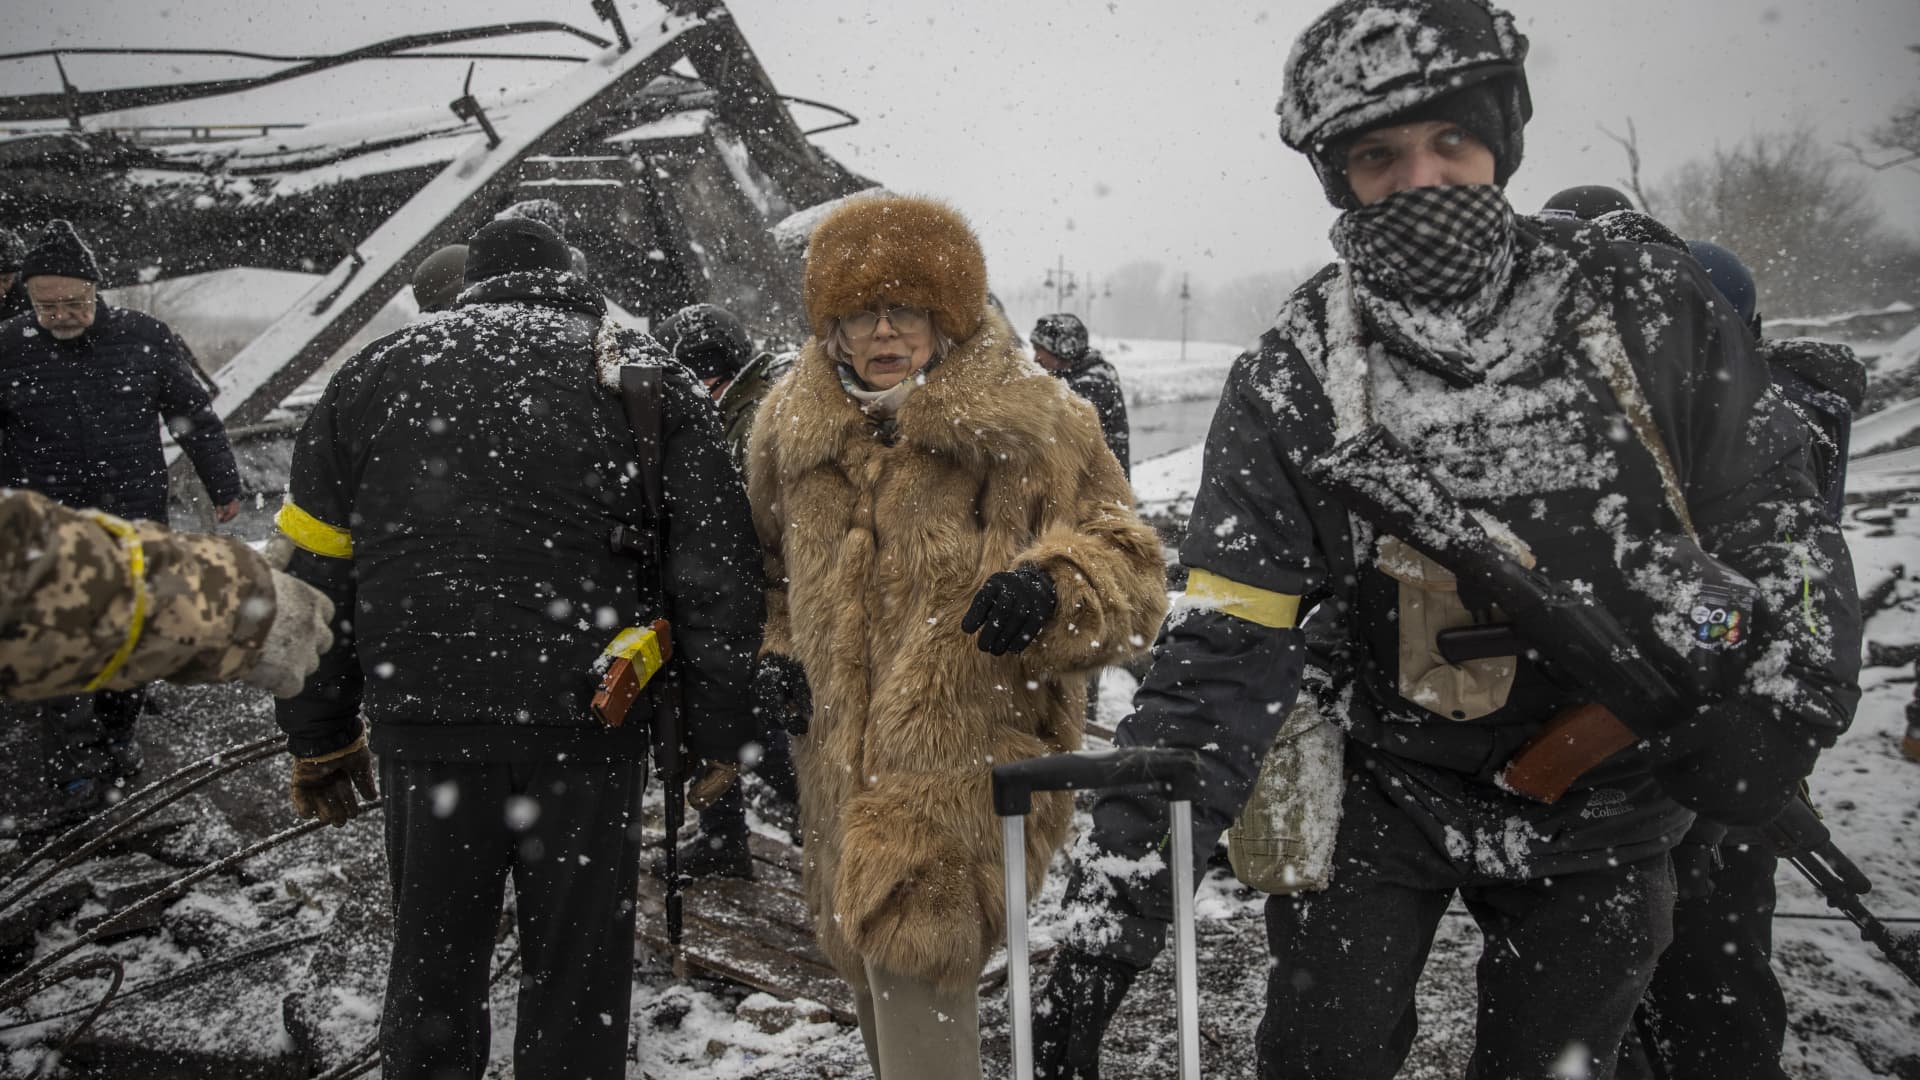 Civilians continue to flee from Irpin due to ongoing Russian attacks as snow falls in Irpin, Ukraine on March 08, 2022.